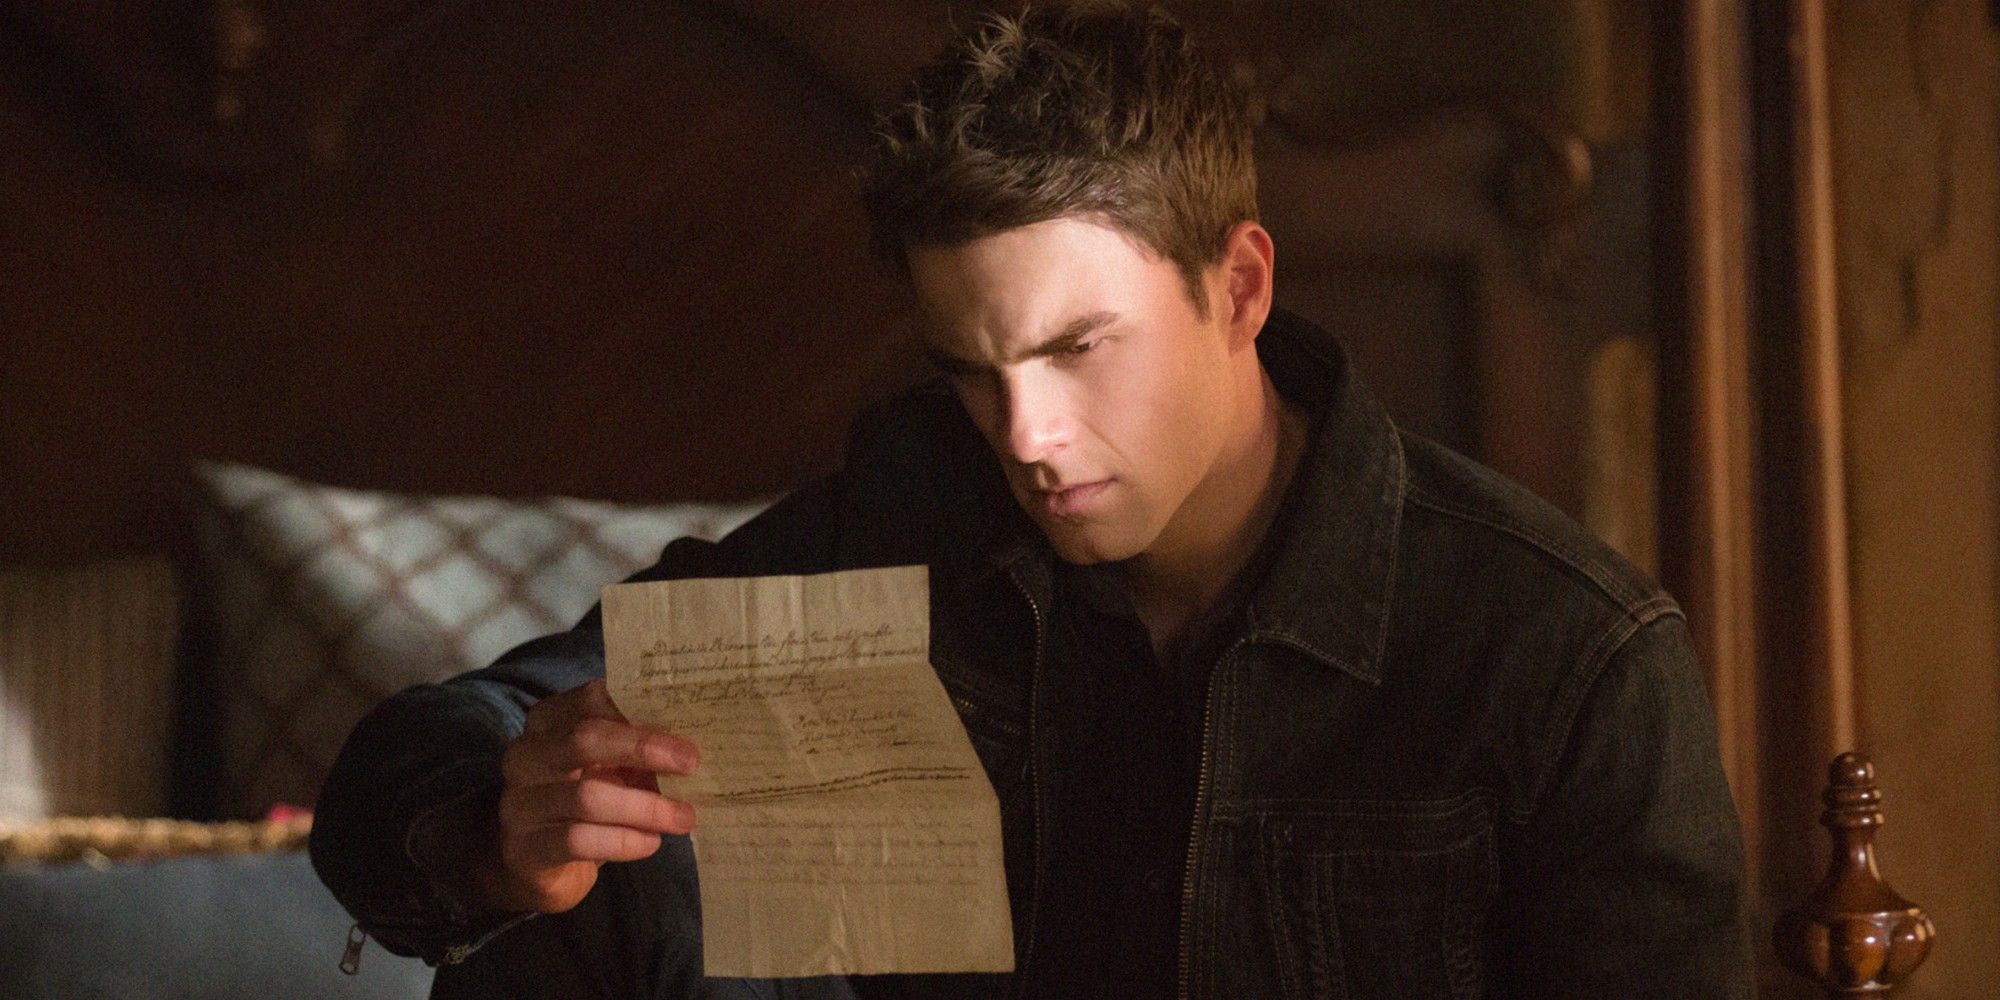 Kol Mikaelson reading a letter